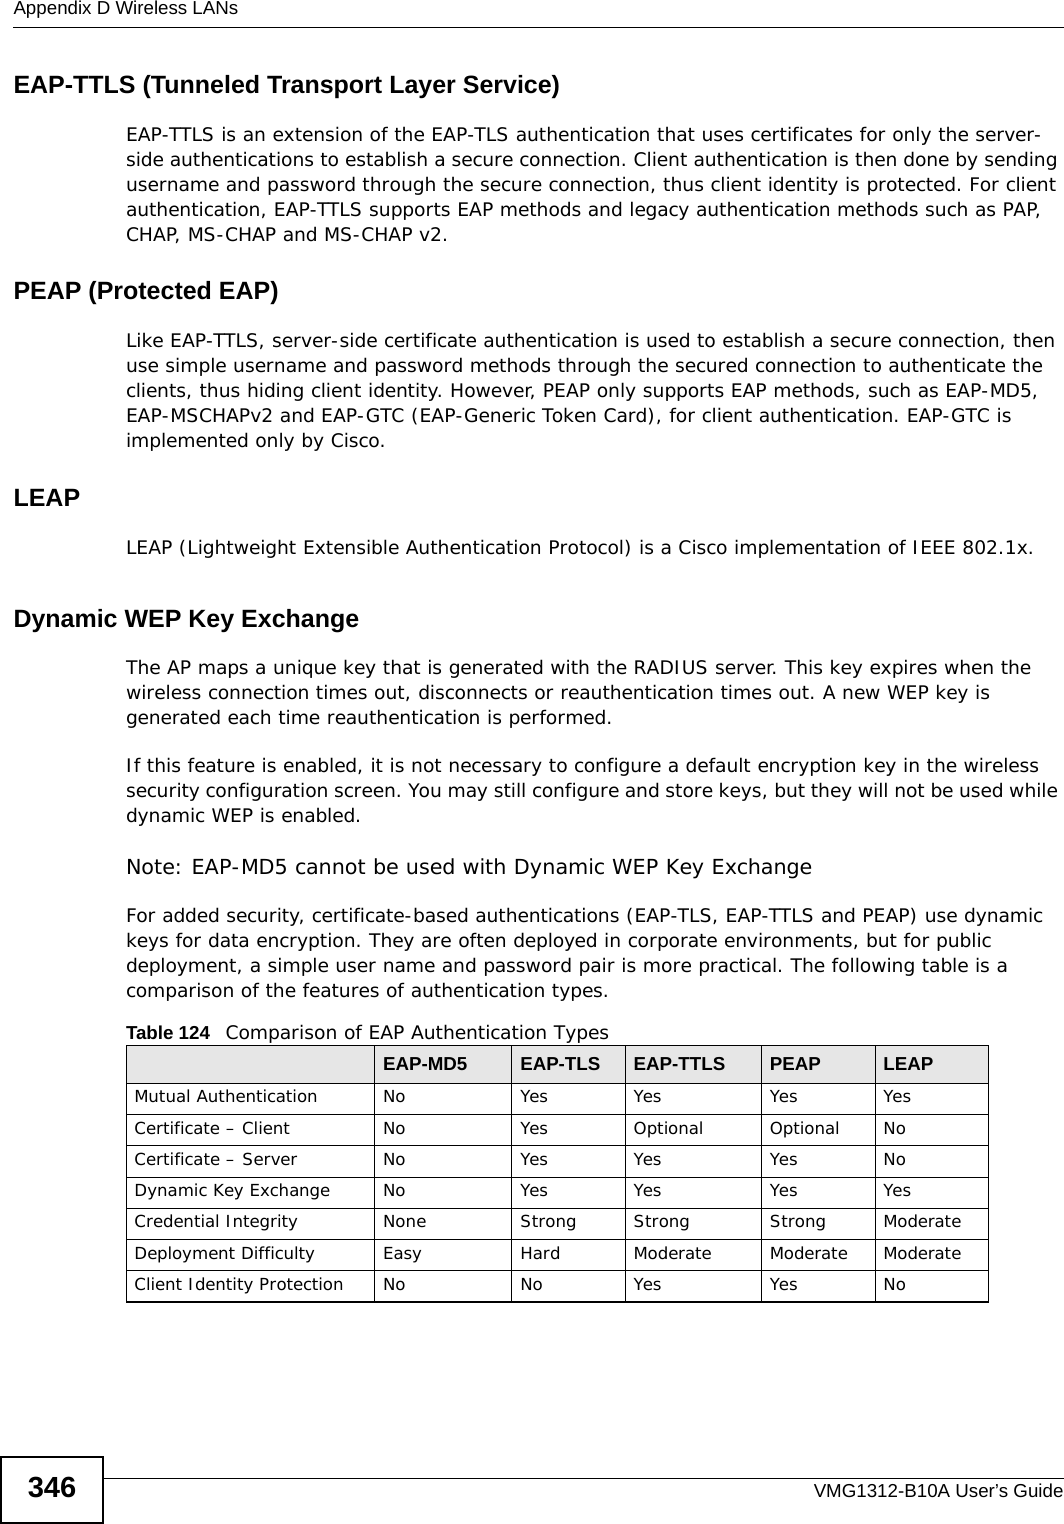 Appendix D Wireless LANsVMG1312-B10A User’s Guide346EAP-TTLS (Tunneled Transport Layer Service) EAP-TTLS is an extension of the EAP-TLS authentication that uses certificates for only the server-side authentications to establish a secure connection. Client authentication is then done by sending username and password through the secure connection, thus client identity is protected. For client authentication, EAP-TTLS supports EAP methods and legacy authentication methods such as PAP, CHAP, MS-CHAP and MS-CHAP v2. PEAP (Protected EAP)   Like EAP-TTLS, server-side certificate authentication is used to establish a secure connection, then use simple username and password methods through the secured connection to authenticate the clients, thus hiding client identity. However, PEAP only supports EAP methods, such as EAP-MD5, EAP-MSCHAPv2 and EAP-GTC (EAP-Generic Token Card), for client authentication. EAP-GTC is implemented only by Cisco.LEAPLEAP (Lightweight Extensible Authentication Protocol) is a Cisco implementation of IEEE 802.1x. Dynamic WEP Key ExchangeThe AP maps a unique key that is generated with the RADIUS server. This key expires when the wireless connection times out, disconnects or reauthentication times out. A new WEP key is generated each time reauthentication is performed.If this feature is enabled, it is not necessary to configure a default encryption key in the wireless security configuration screen. You may still configure and store keys, but they will not be used while dynamic WEP is enabled.Note: EAP-MD5 cannot be used with Dynamic WEP Key ExchangeFor added security, certificate-based authentications (EAP-TLS, EAP-TTLS and PEAP) use dynamic keys for data encryption. They are often deployed in corporate environments, but for public deployment, a simple user name and password pair is more practical. The following table is a comparison of the features of authentication types.Table 124   Comparison of EAP Authentication TypesEAP-MD5 EAP-TLS EAP-TTLS PEAP LEAPMutual Authentication No Yes Yes Yes YesCertificate – Client No Yes Optional Optional NoCertificate – Server No Yes Yes Yes NoDynamic Key Exchange No Yes Yes Yes YesCredential Integrity None Strong Strong Strong ModerateDeployment Difficulty Easy Hard Moderate Moderate ModerateClient Identity Protection No No Yes Yes No